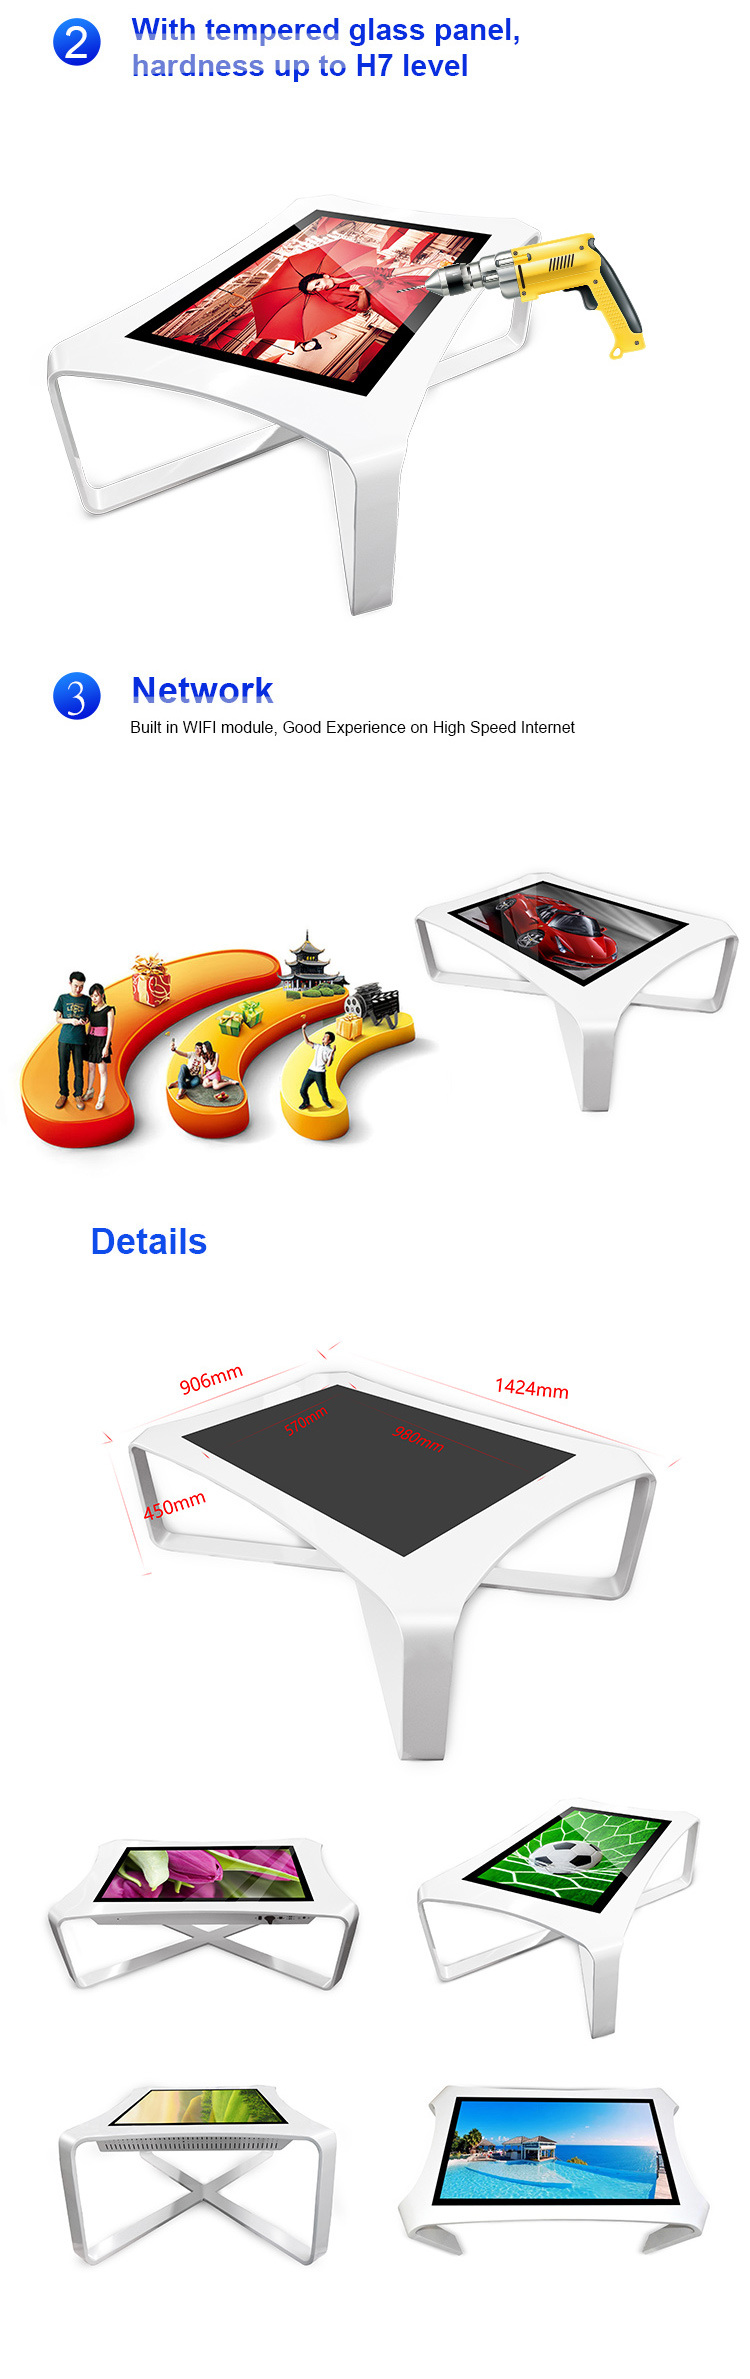 LCD Digital Signage Interactive Touch Table for Education